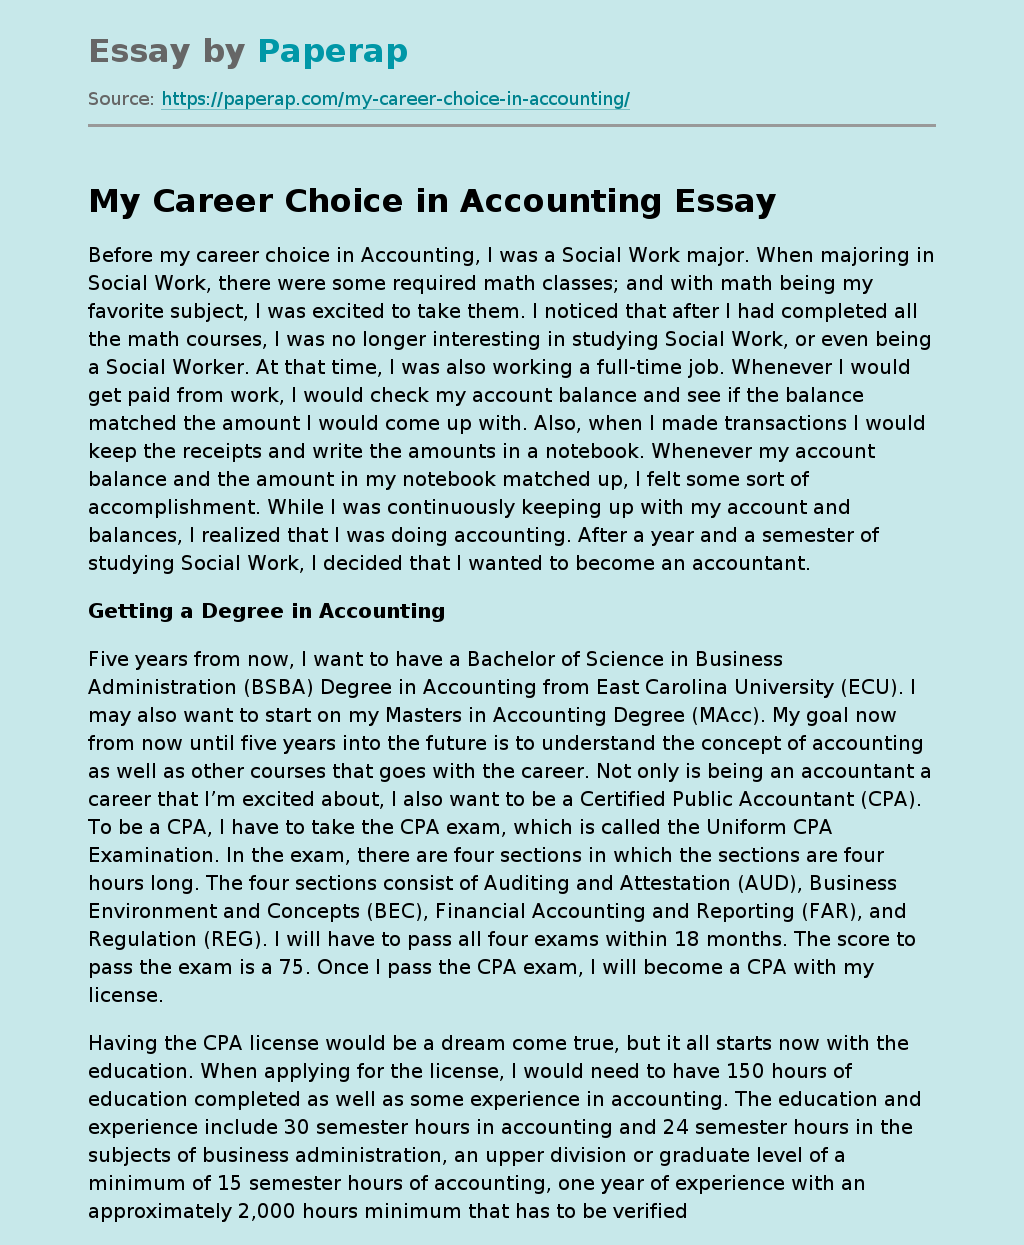 My Career Choice in Accounting